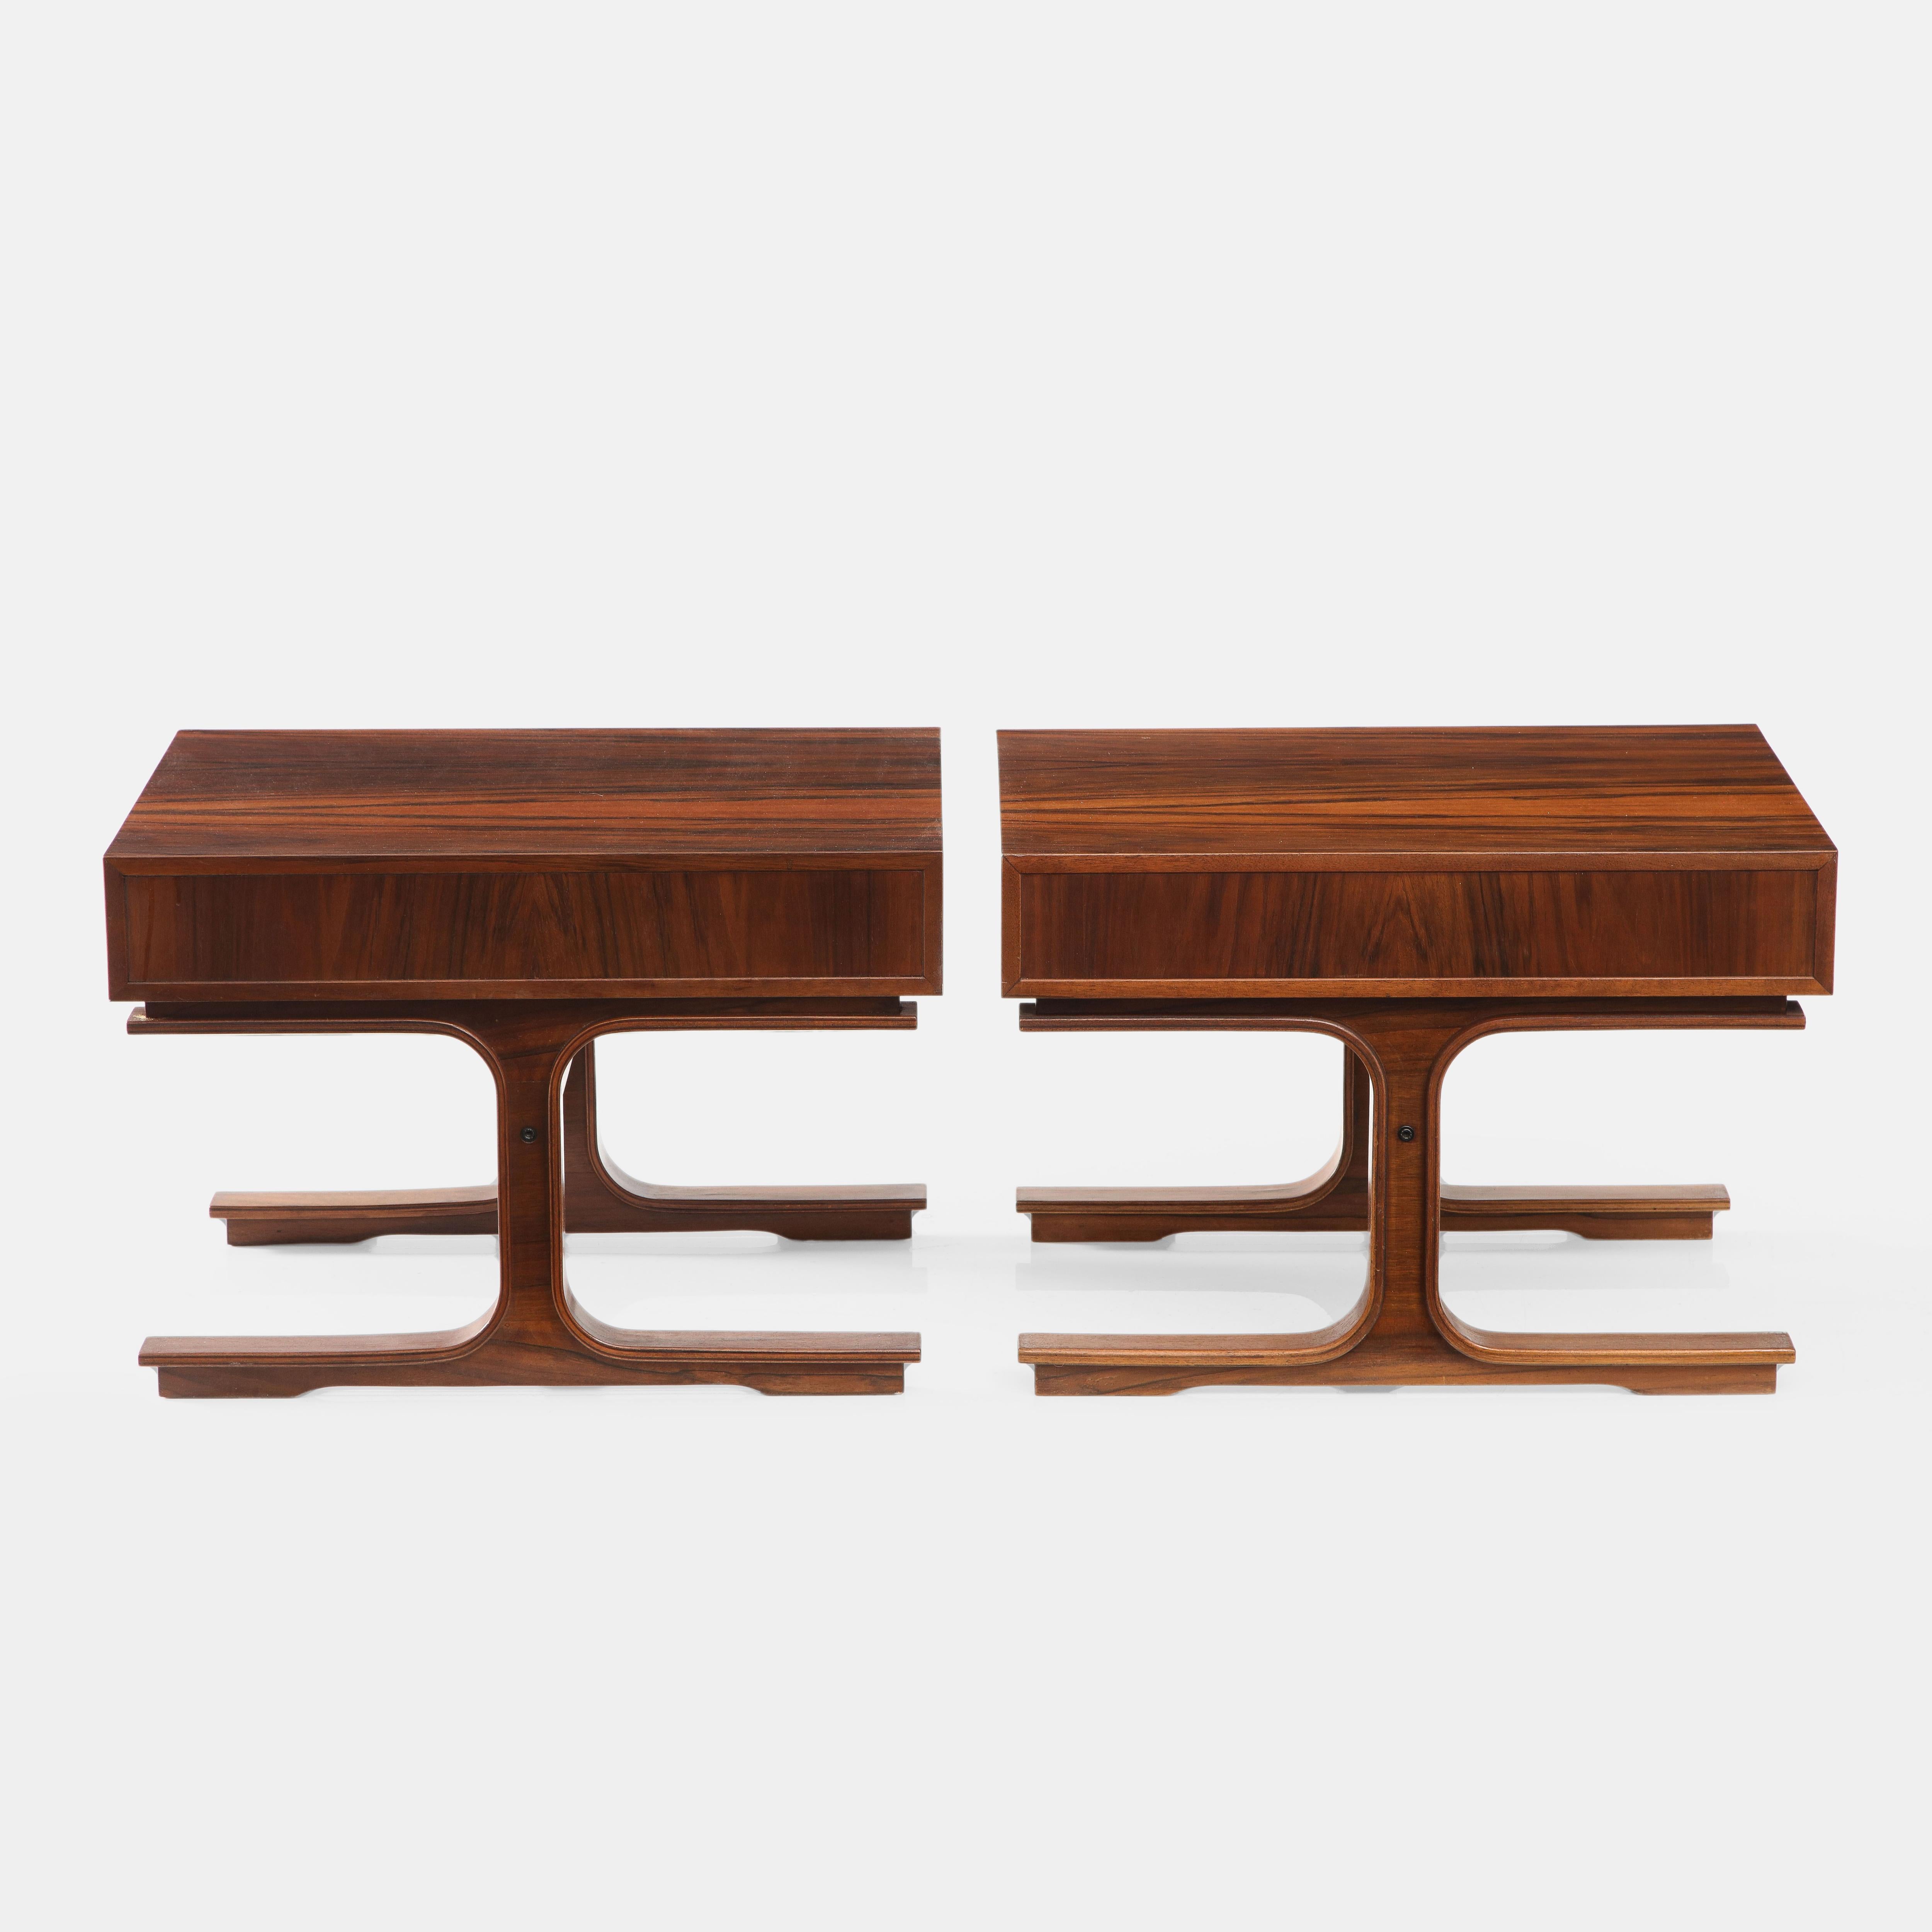 Italian Gianfranco Frattini for Bernini Pair of Rosewood Side or Bedside Tables, 1950s